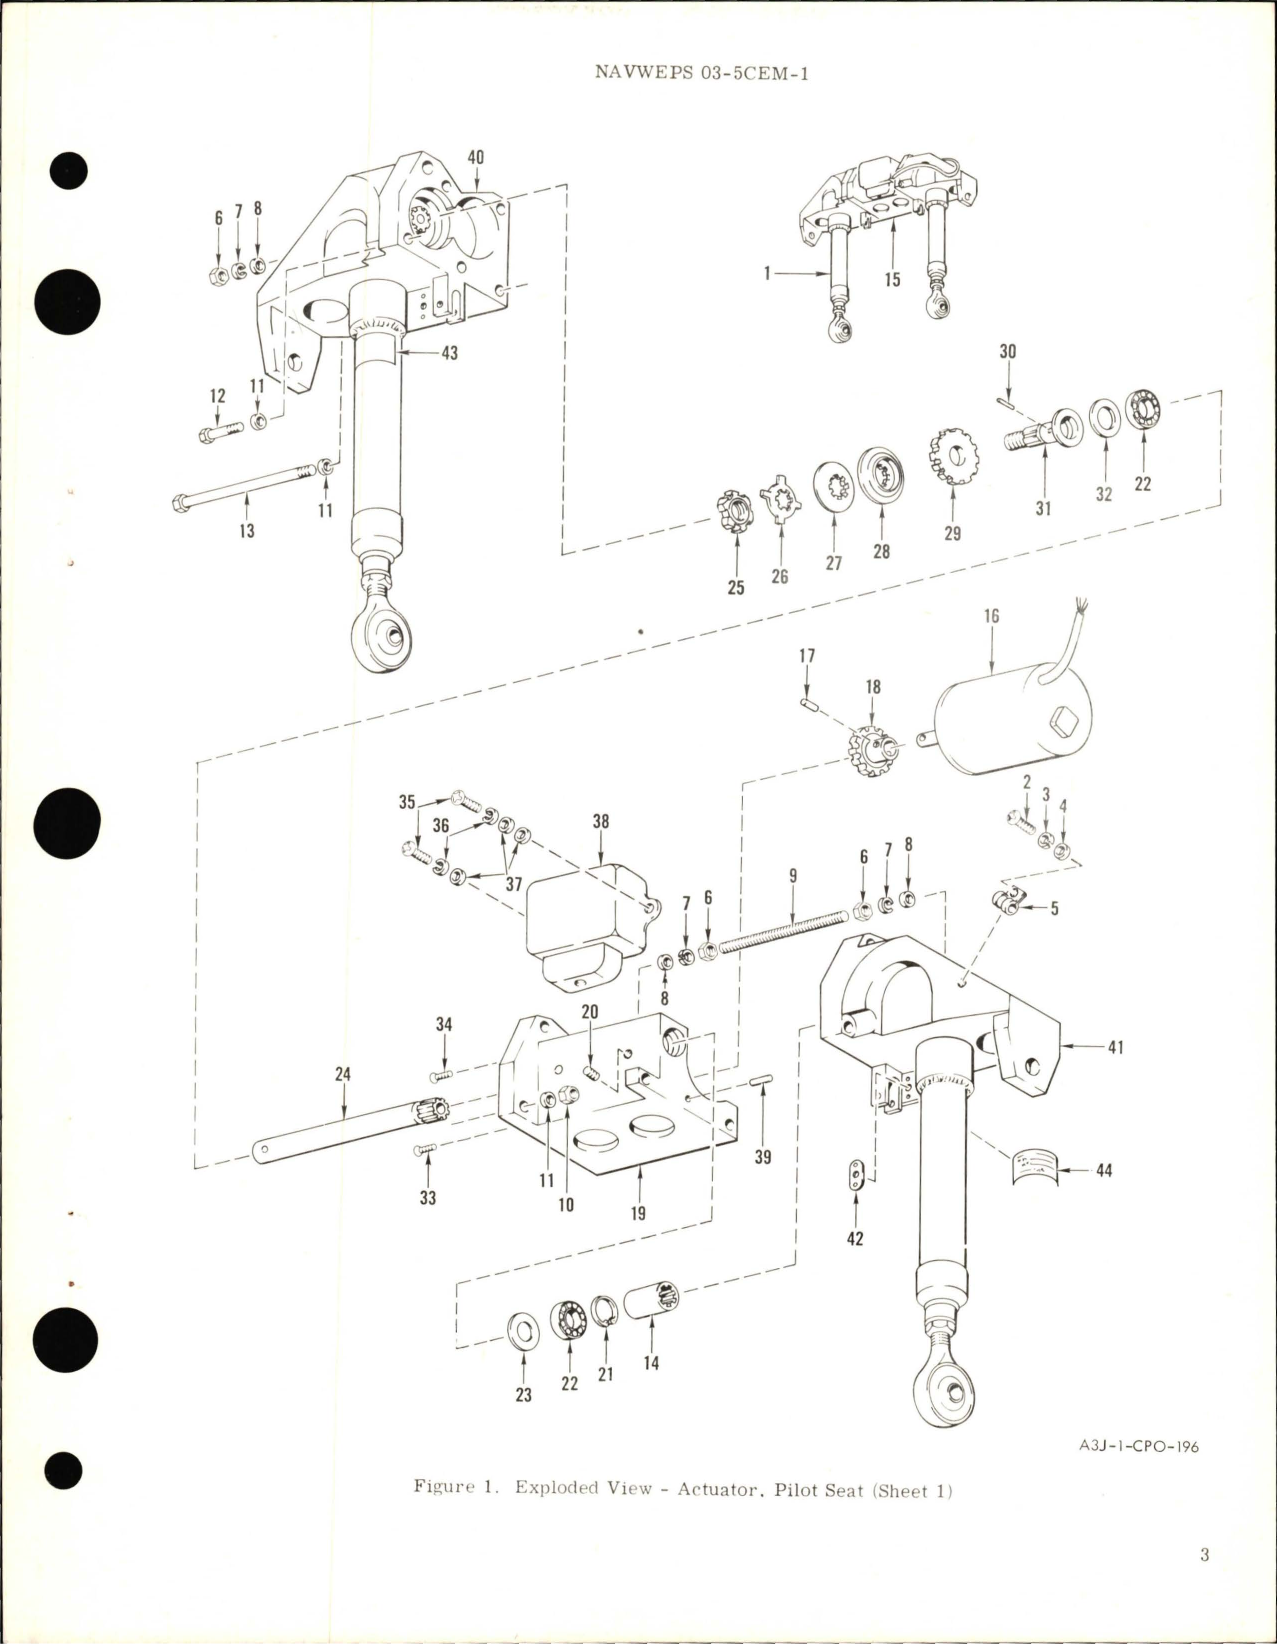 Sample page 5 from AirCorps Library document: Overhaul Instructions with Parts Breakdown for Pilot Seat Actuator - Part 43800-3 